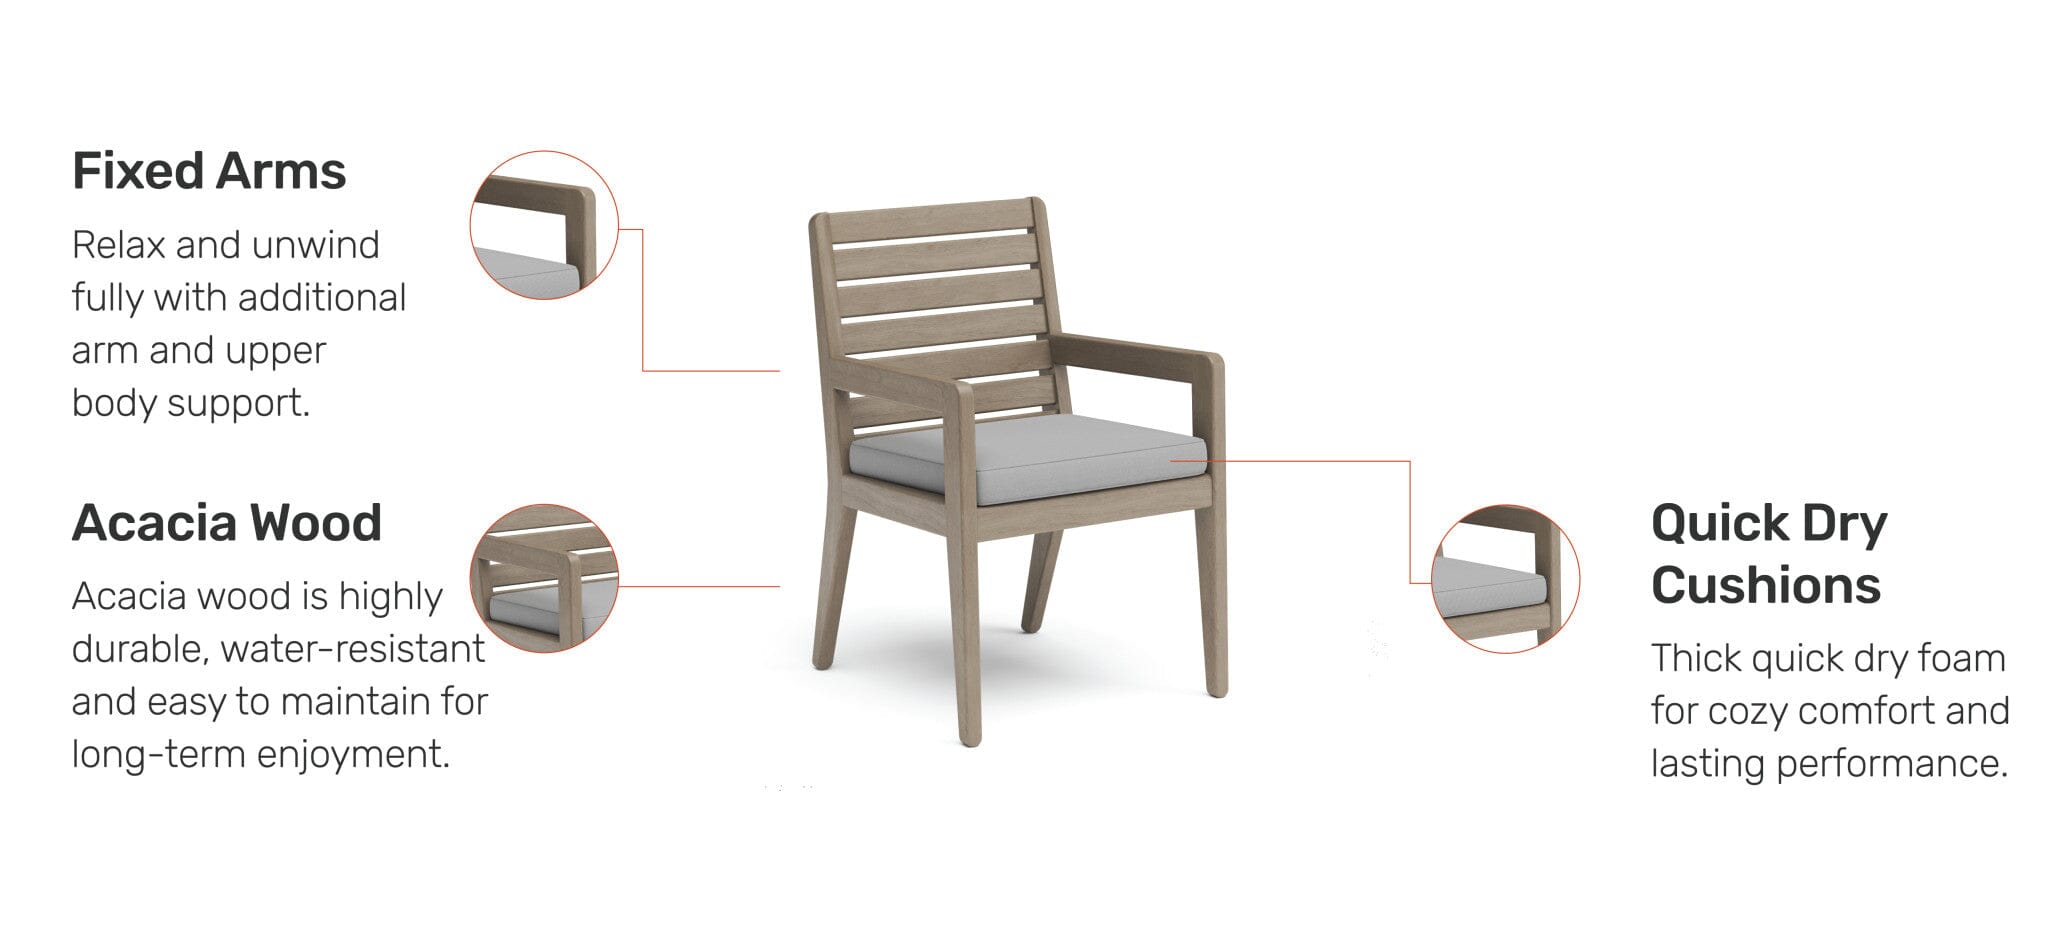 Transitional Outdoor Dining Armchair Pair By Sustain Outdoor Dining Chair Sustain